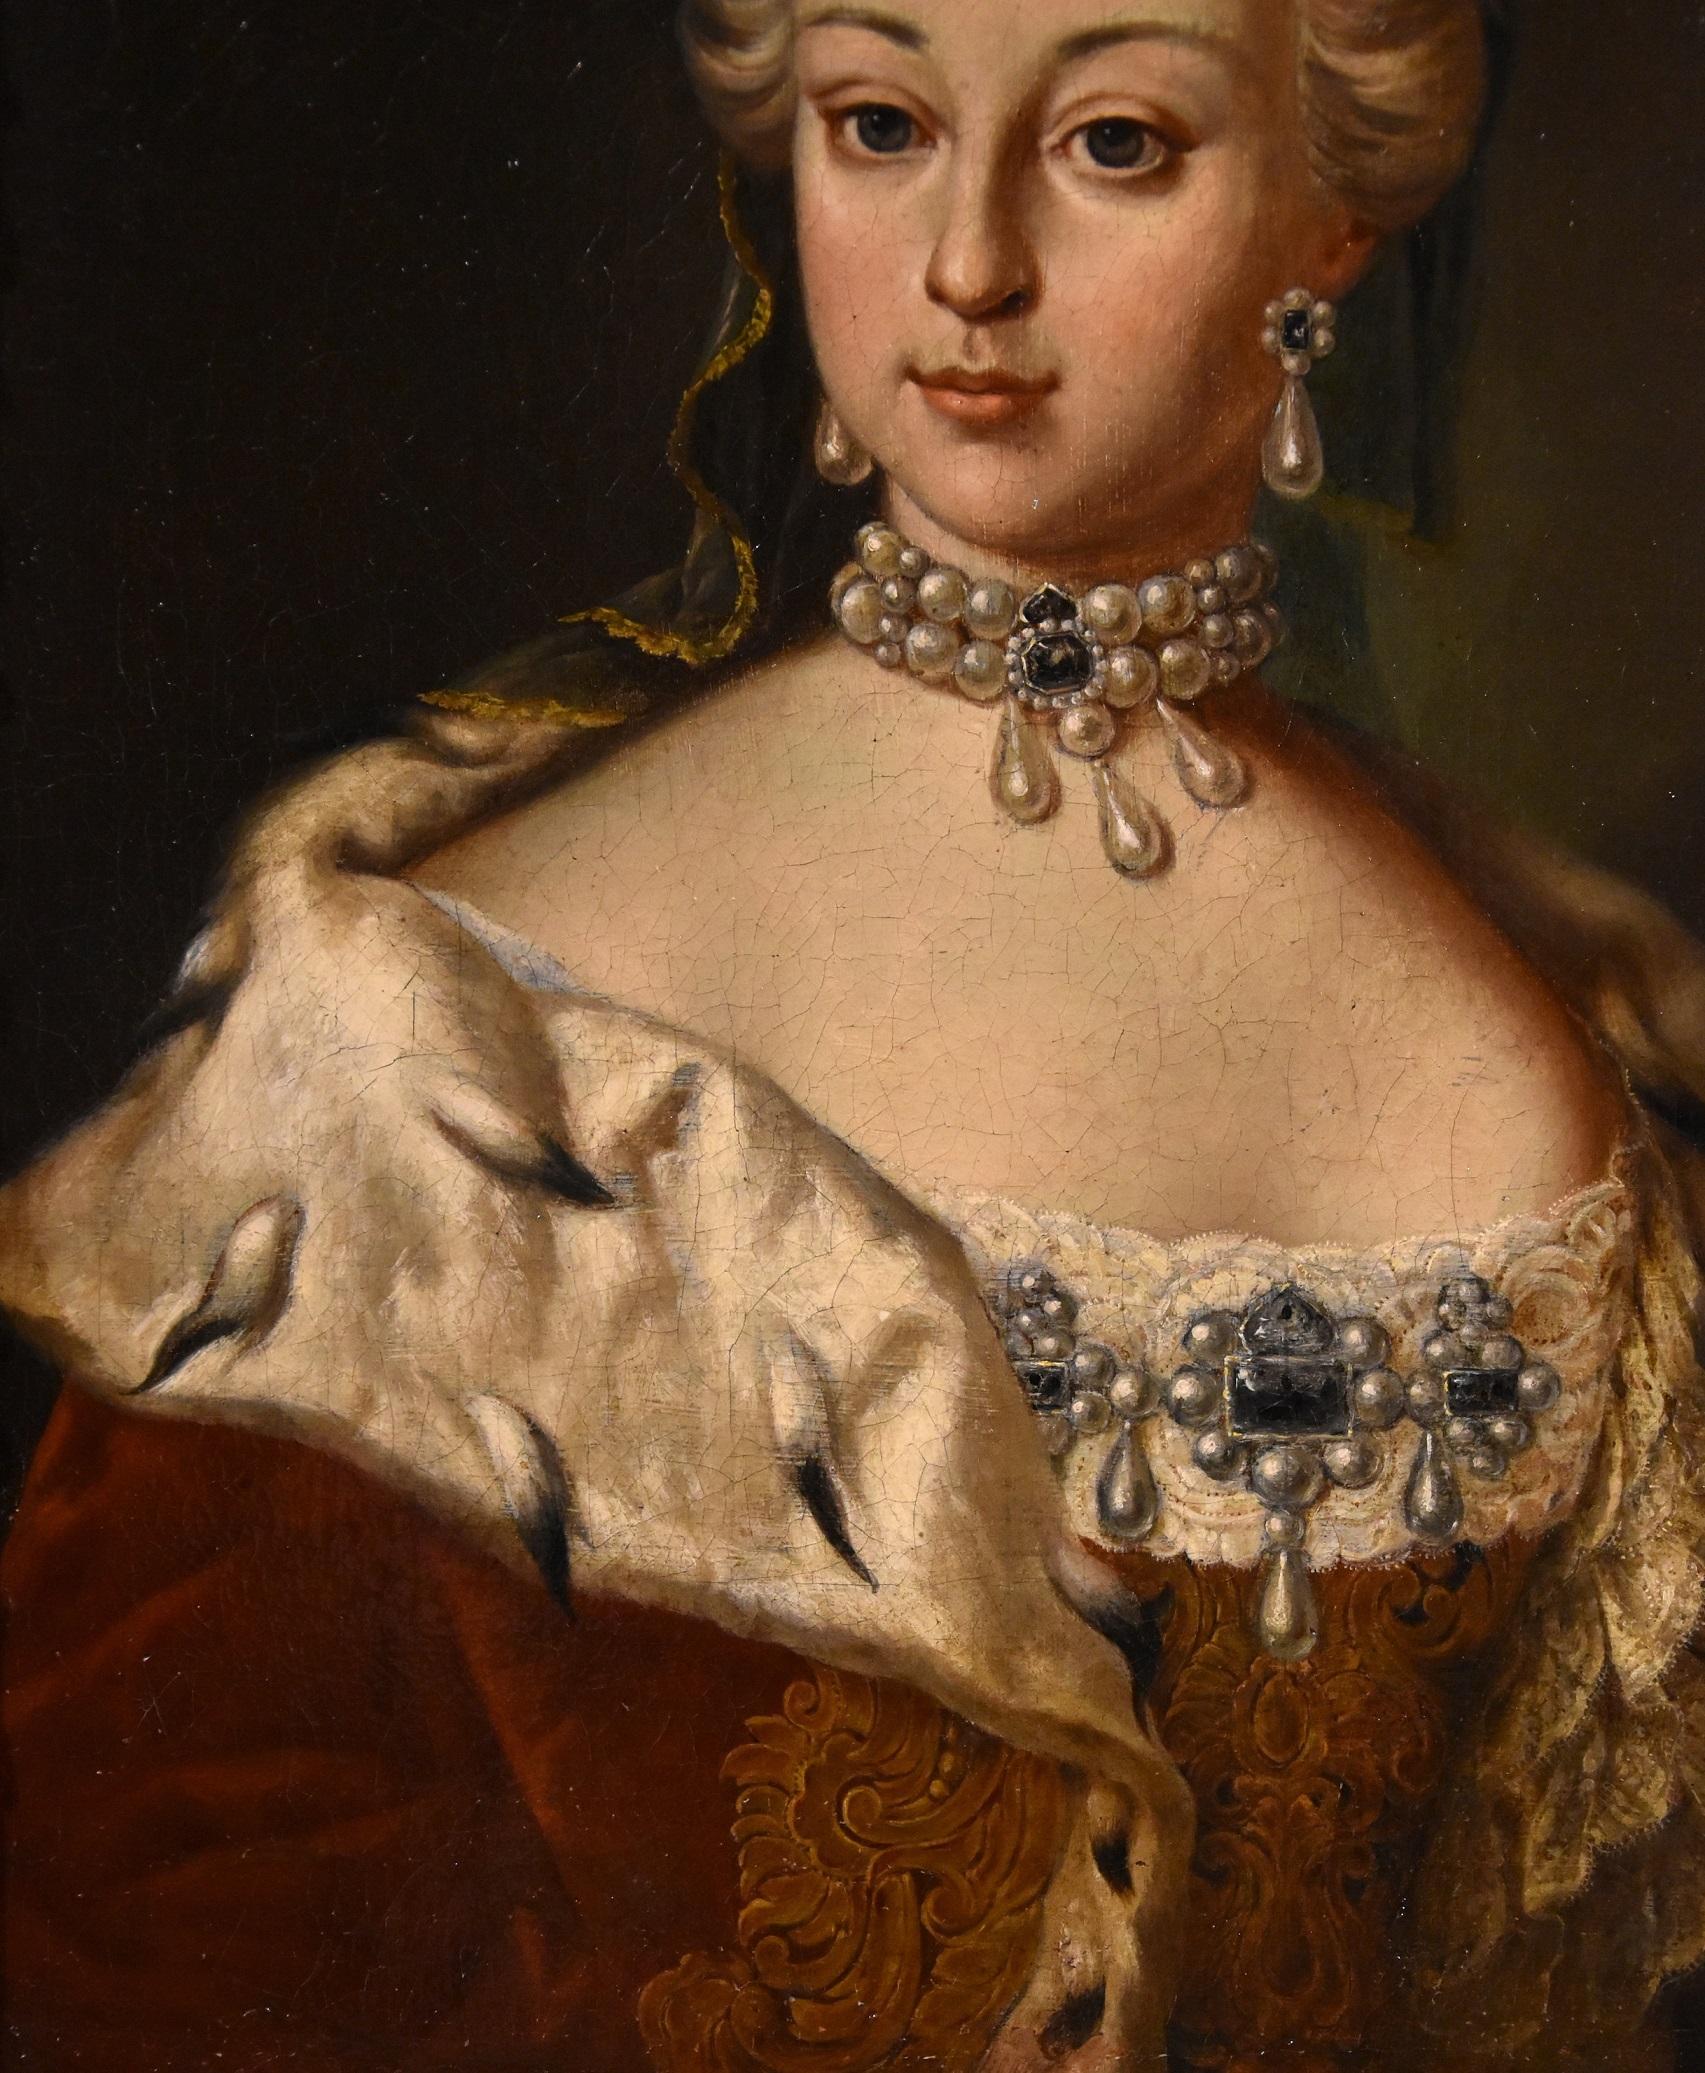 Martin van Meytens (Stockholm 1695 - Vienna 1770) workshop

Portrait of Empress Maria Theresa of Habsburg (Vienna 1717 - Vienna 1780)

Reigning archduchess of Austria, apostolic queen of Hungary, reigning queen of Bohemia and Croatia and Slavonia,